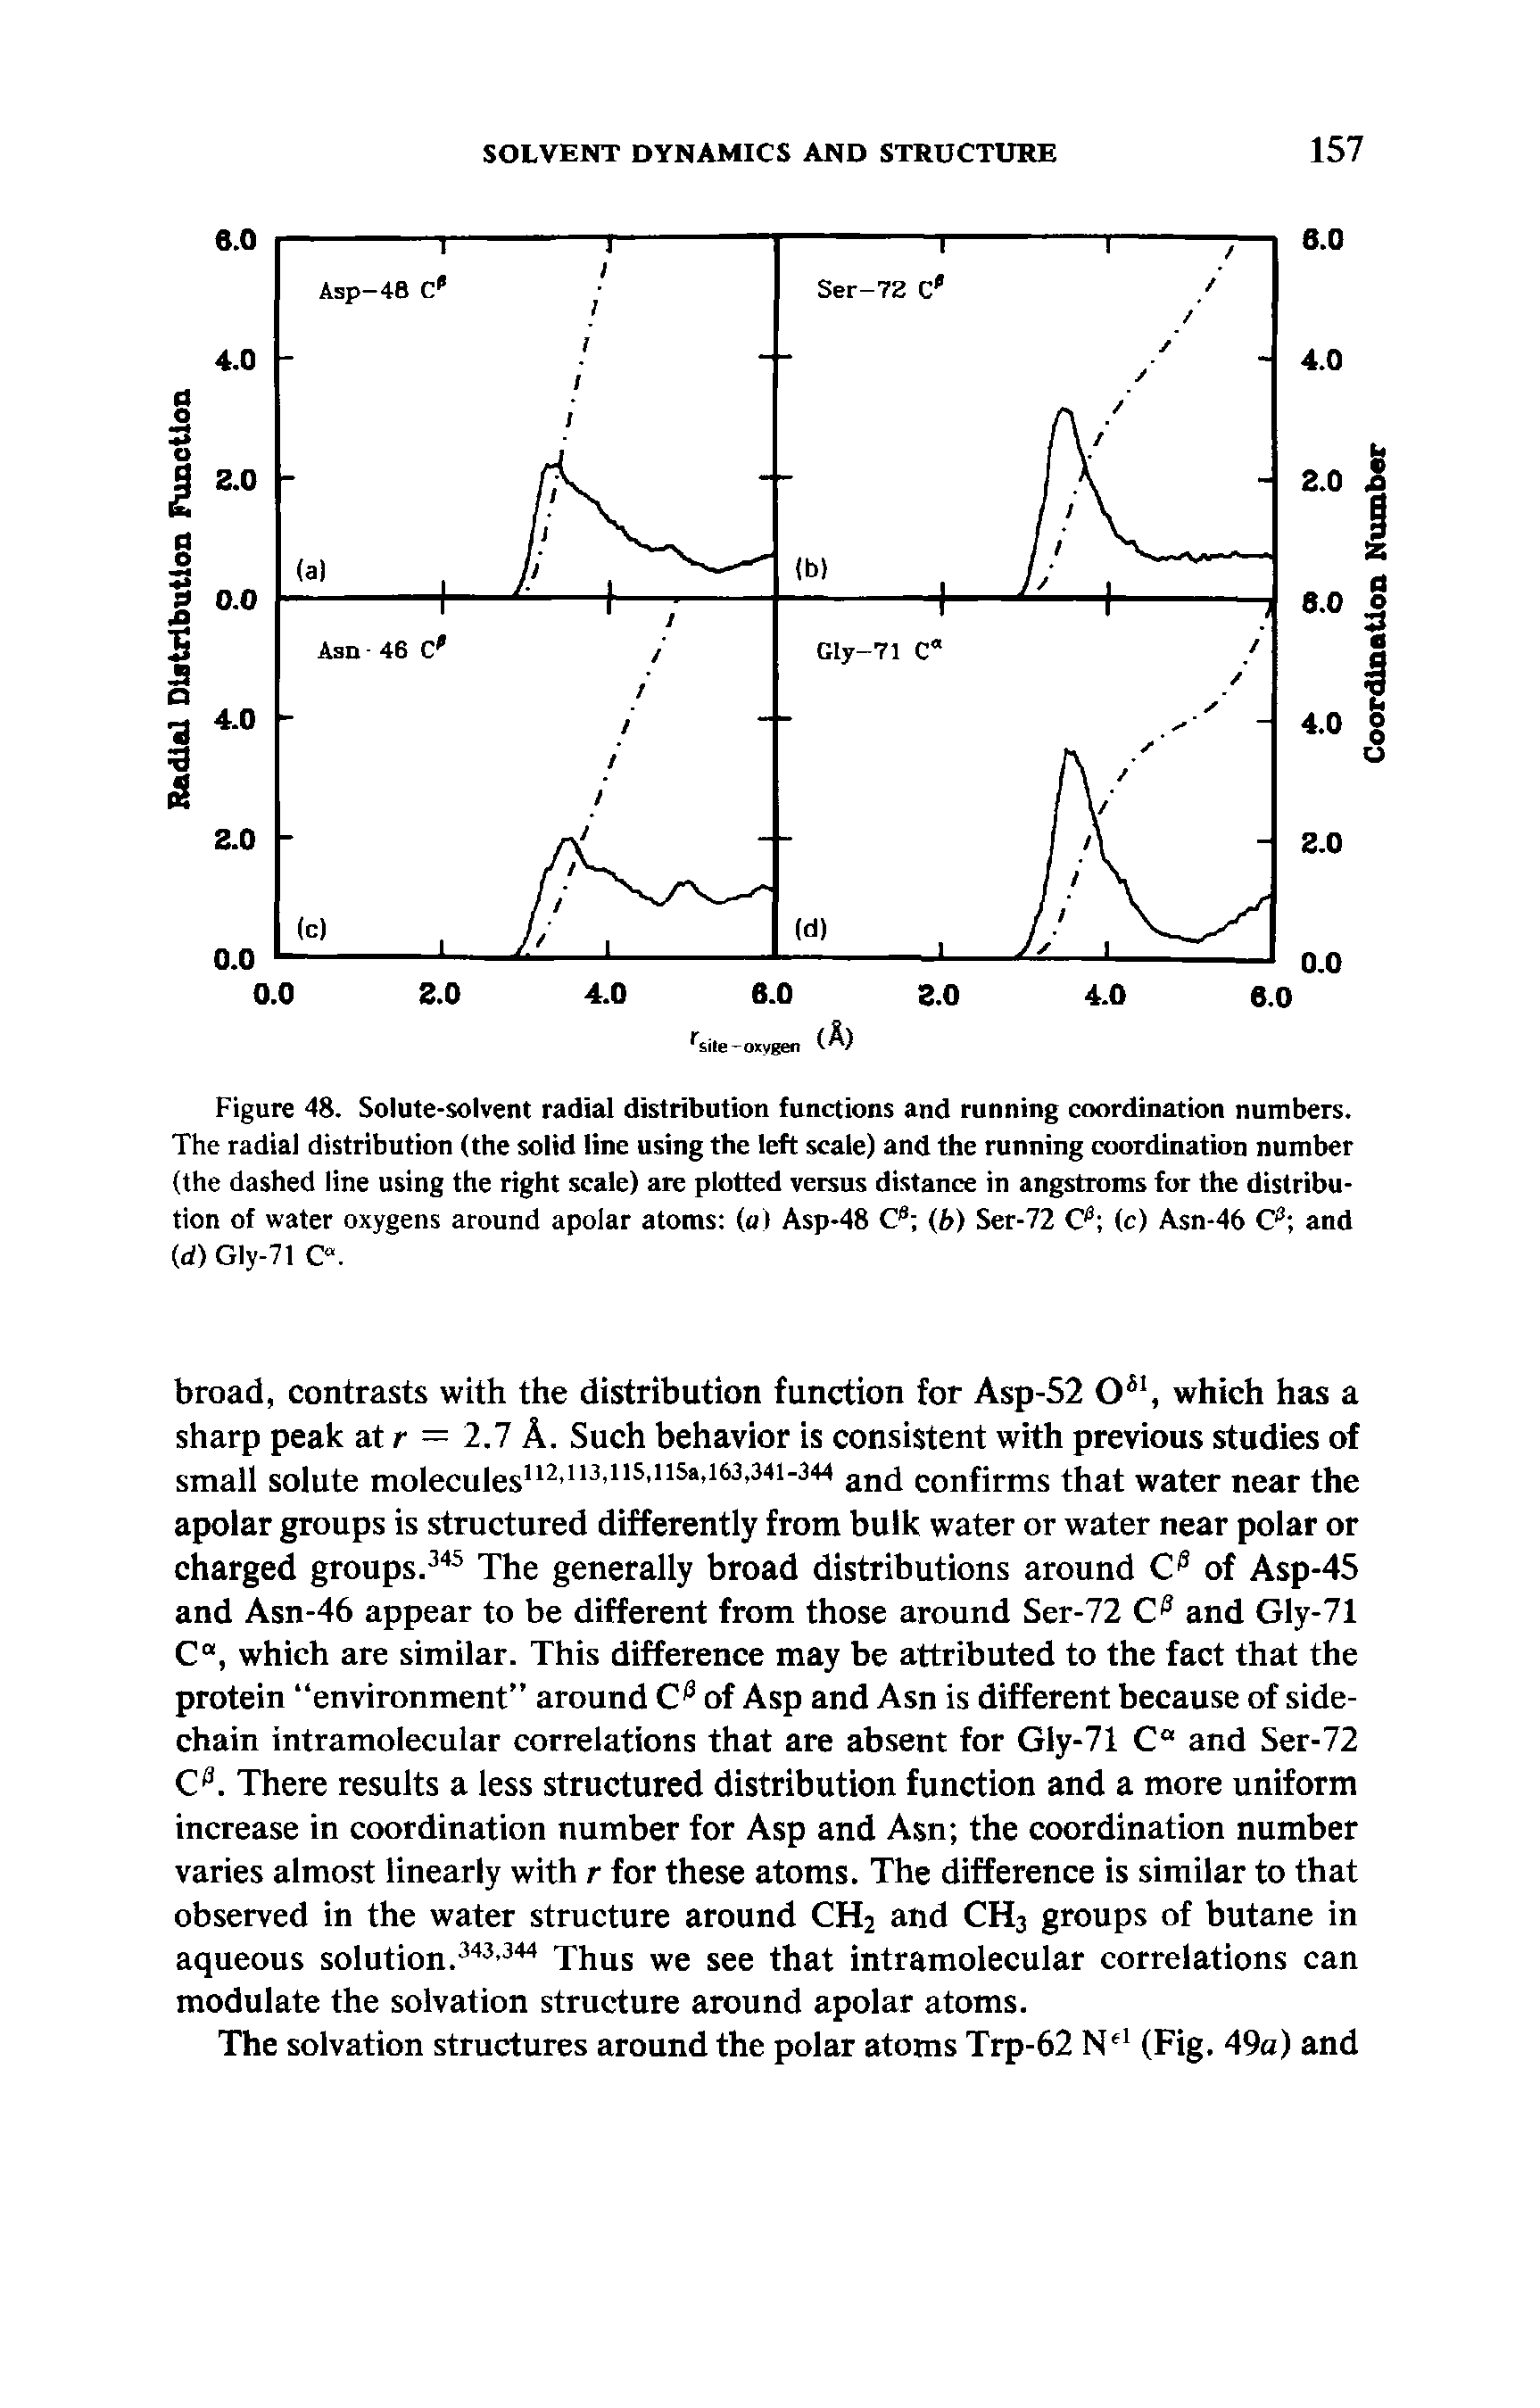 Figure 48. Solute-solvent radial distribution functions and running coordination numbers. The radial distribution (the solid line using the left scale) and the running coordination number (the dashed line using the right scale) are plotted versus distance in angstroms for the distribution of water oxygens around apolar atoms (o) Asp-48 Cs (b) Ser-72 O3 (c) Asn-46 C 3 and ((i) Gly-71 C .